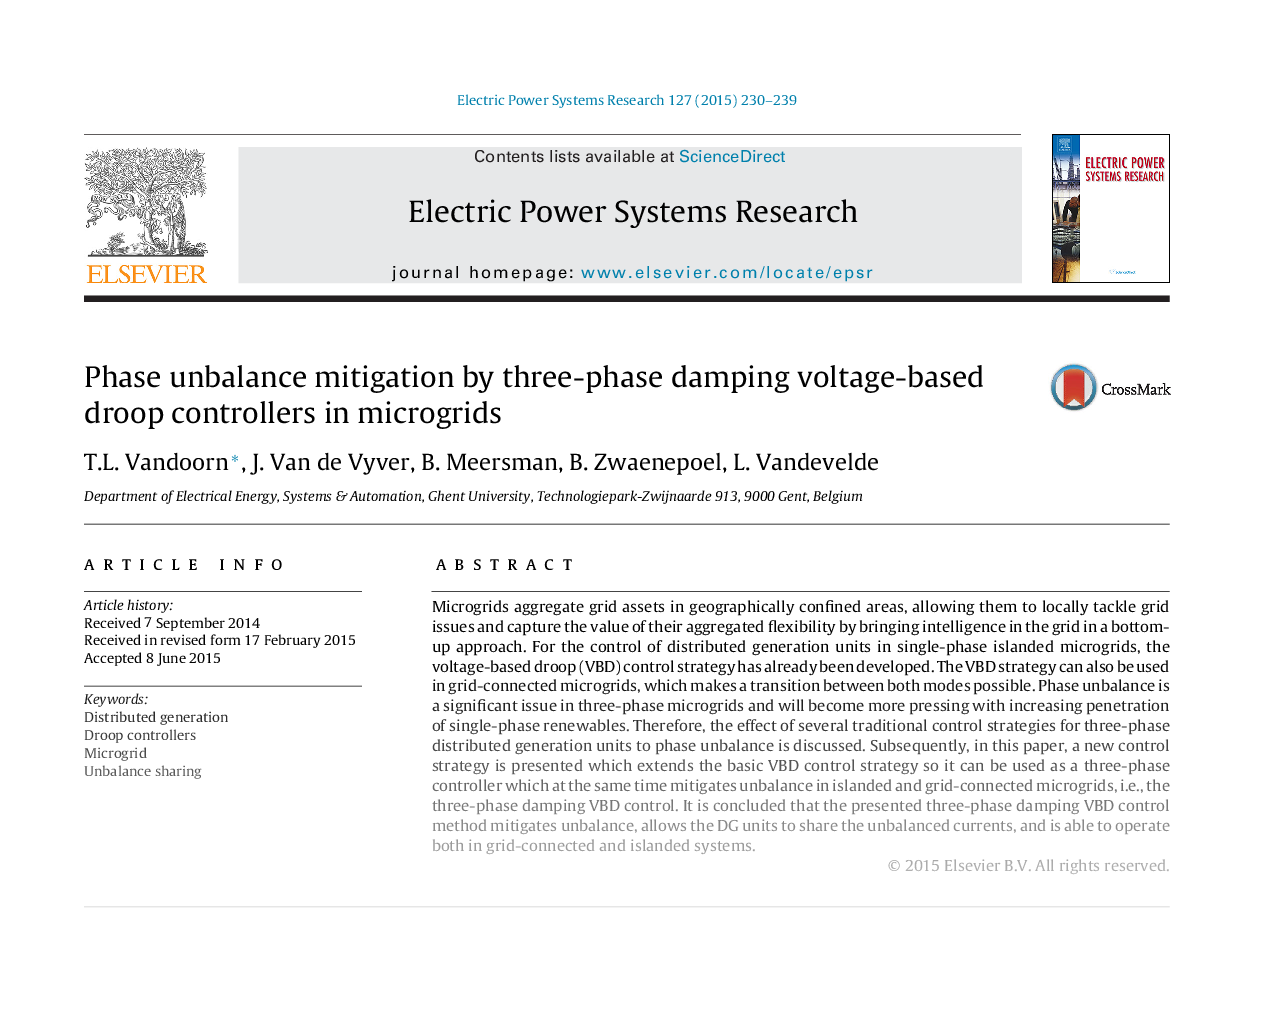 Phase unbalance mitigation by three-phase damping voltage-based droop controllers in microgrids